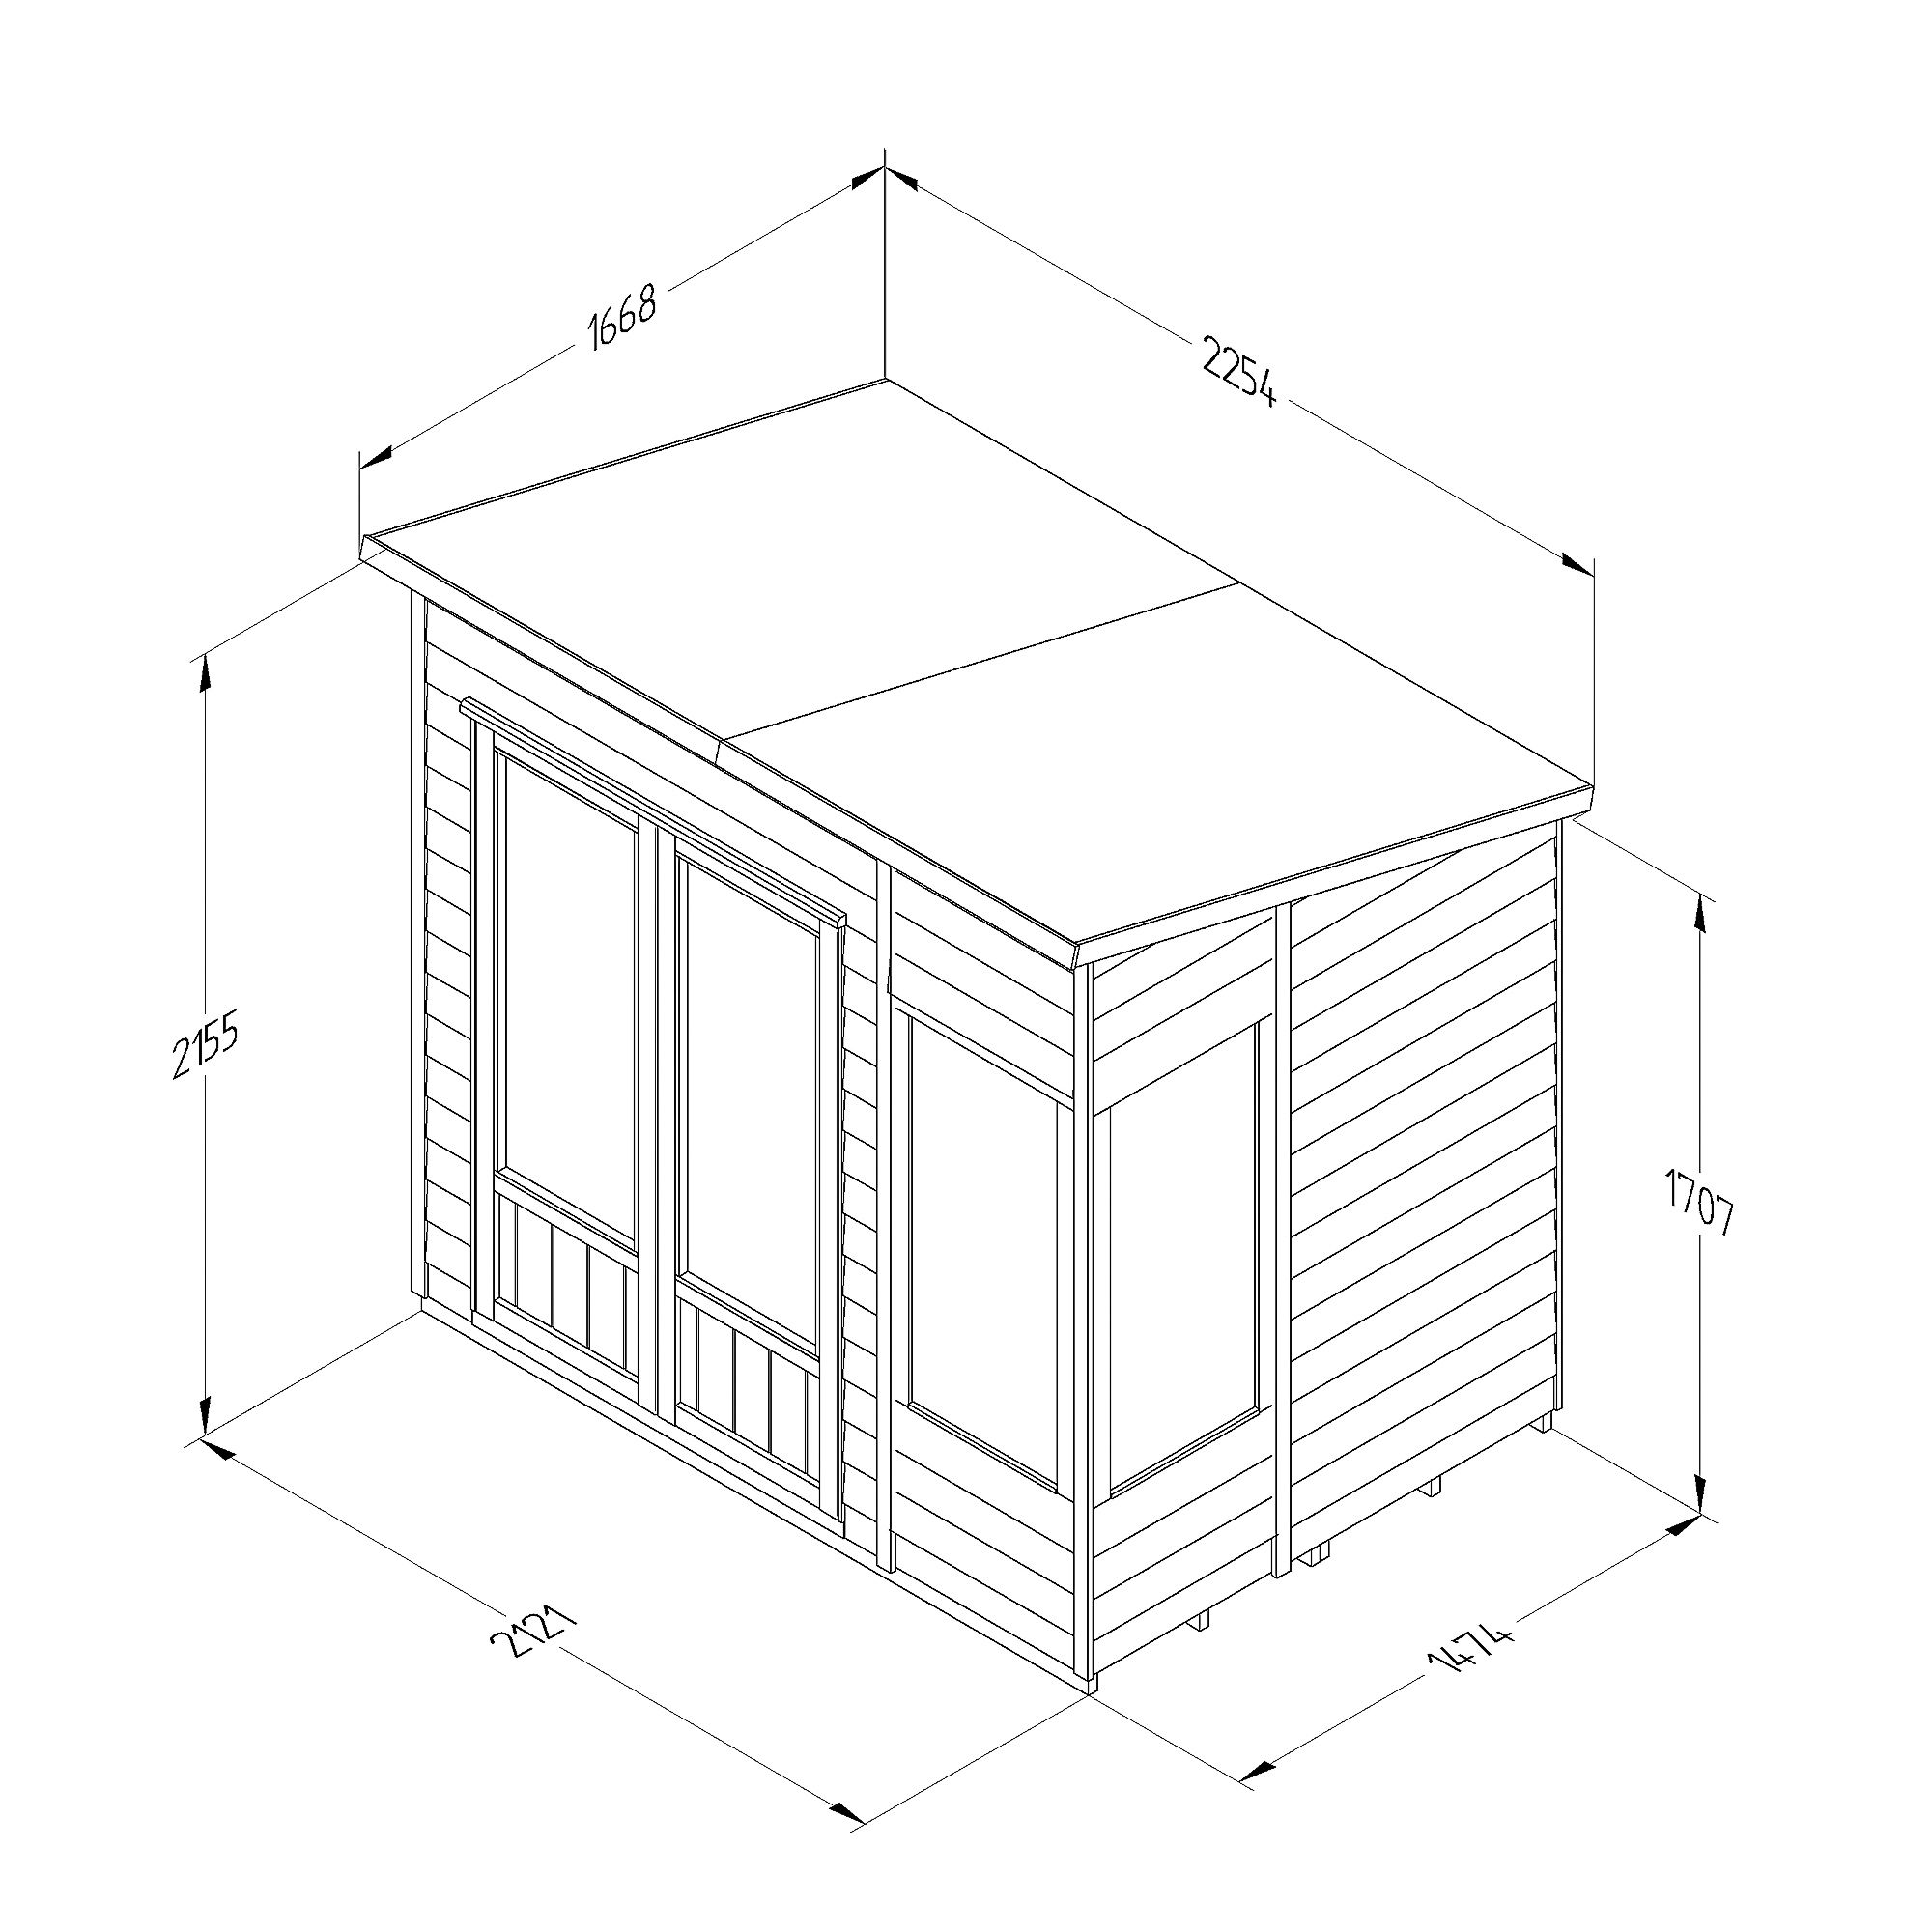 Forest Garden Oakley 7x5 ft with Double door & 3 windows Pent Wooden Summer house (Base included)